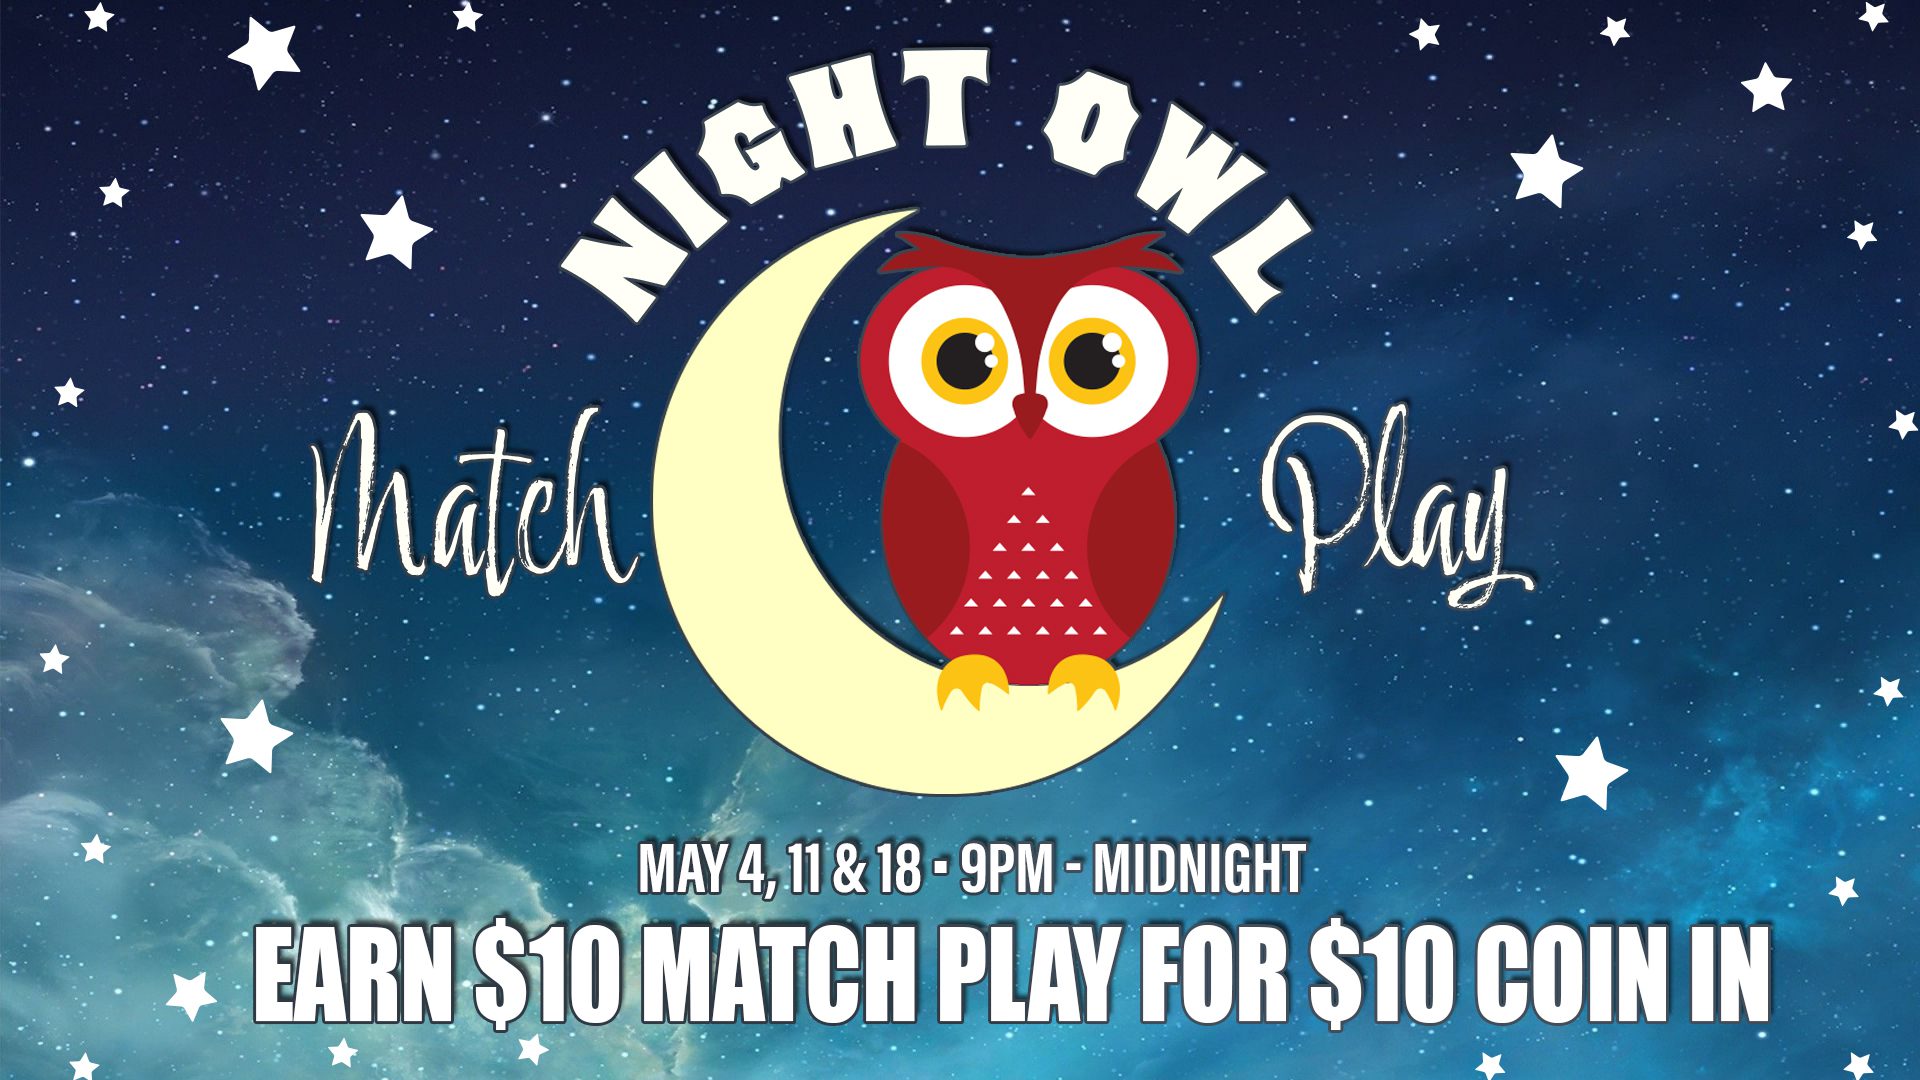 A promotional graphic for a "night owl match play" event with dates and times listed, featuring an illustration of an owl on a crescent moon against a starry sky background.